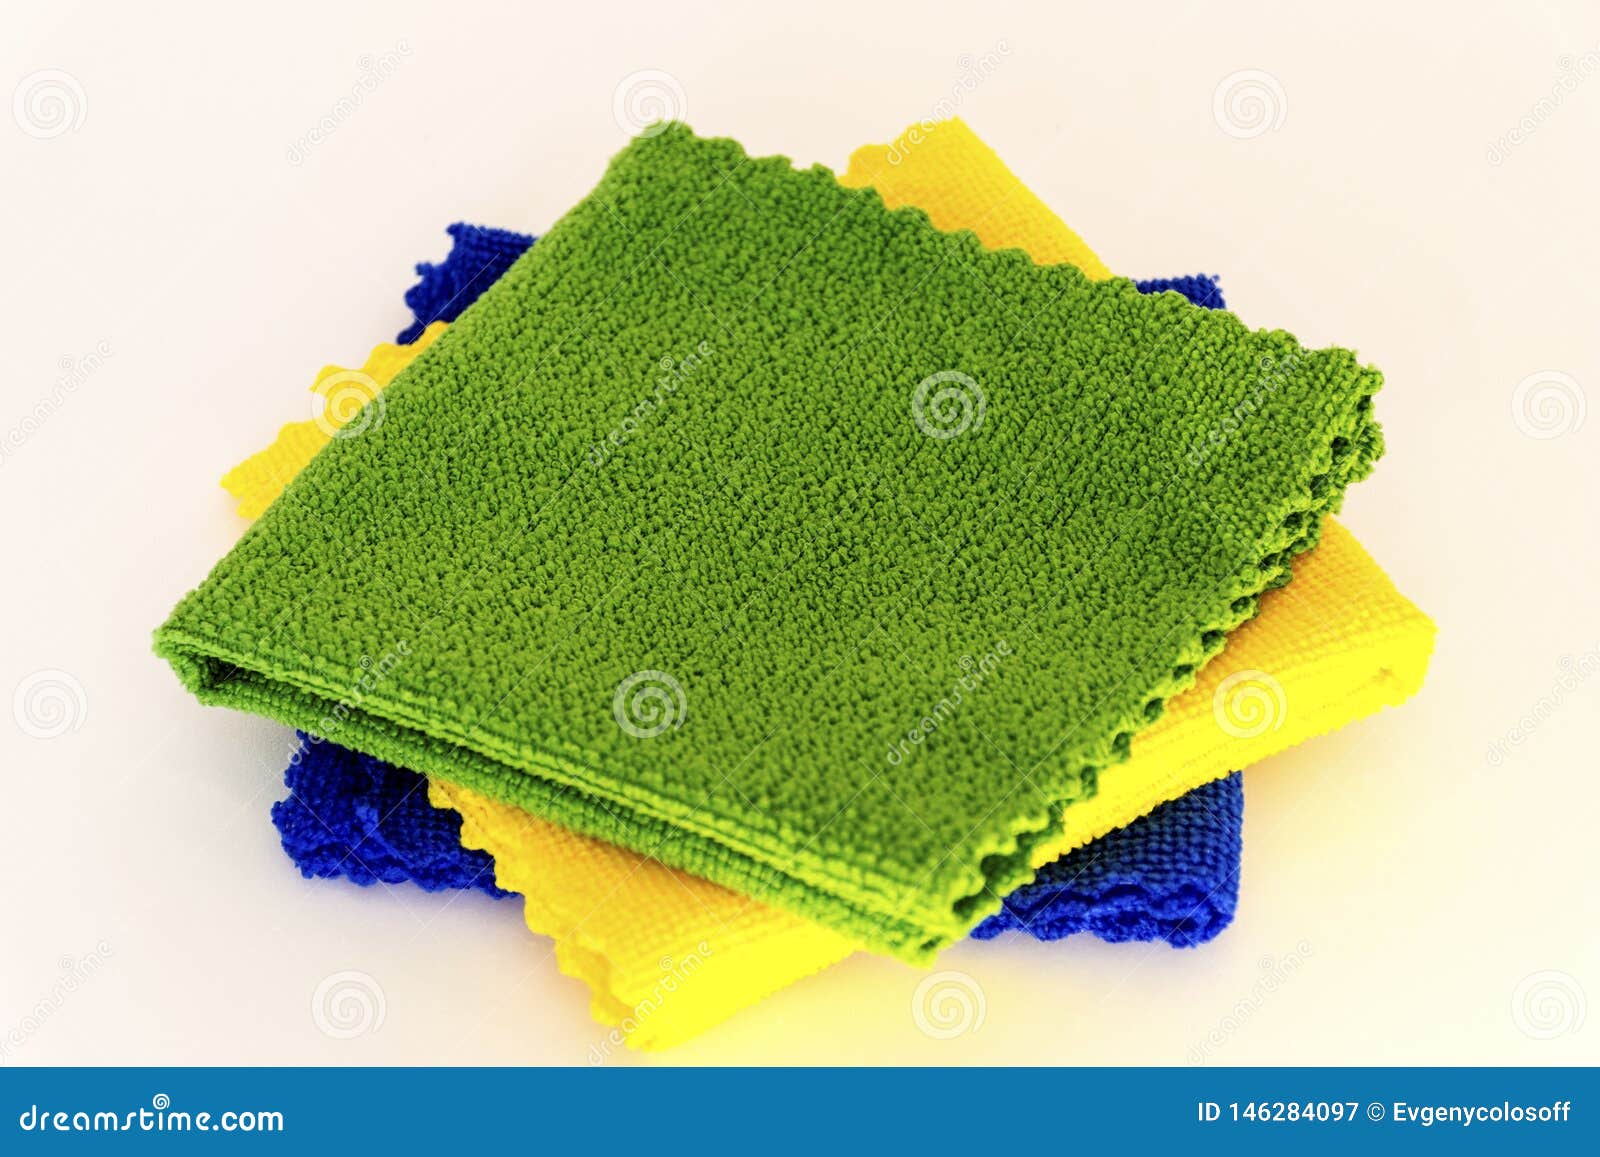 Three Kitchen Wipes for Cleaning Dust. Stock Image - Image of